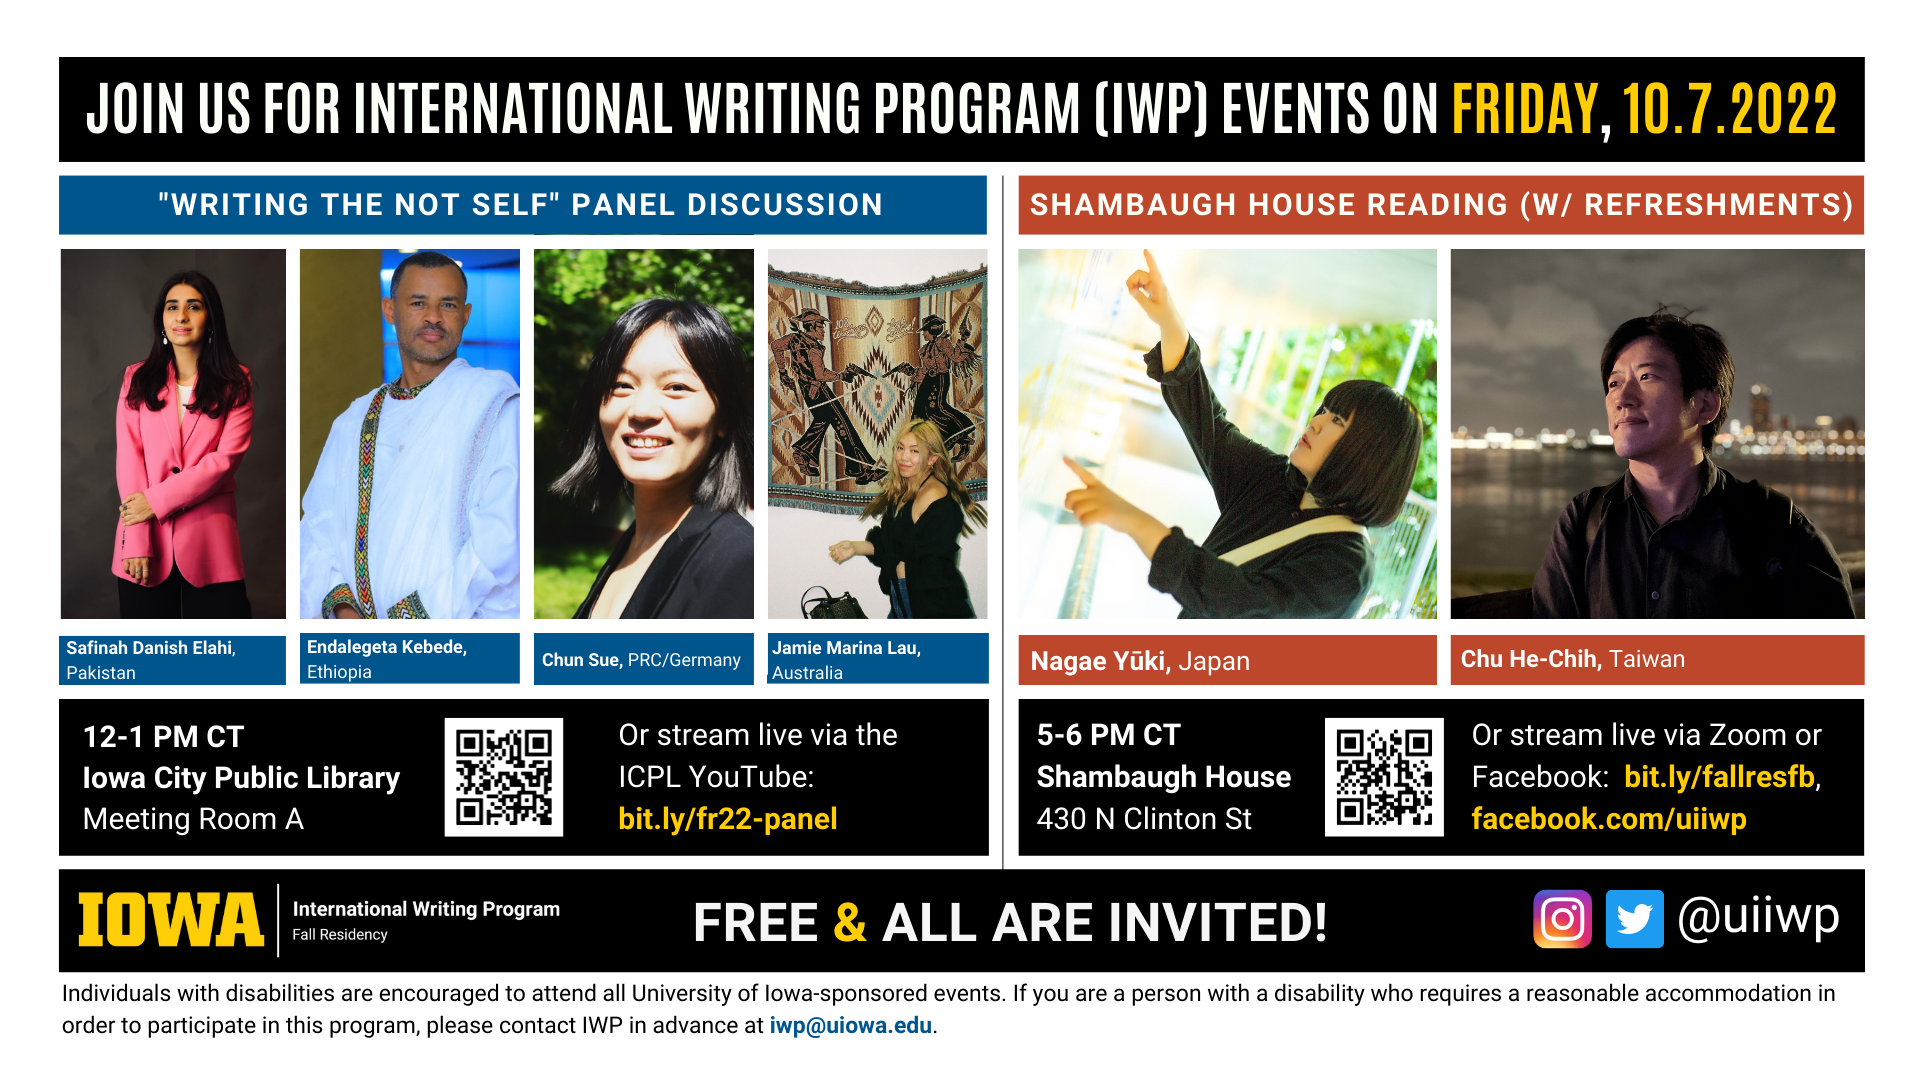 An image with two halves, each advertising one event. The image as a whole is labeled “Join us for International Writing Program (IWP) events on Friday, 10.7.2022.” The left half of the image is labeled, “'Writing the Not Self' Library Panel Discussion.” There are portraits of four writers (named below) and the following text: "Safinah Danish Elahi, Endalegeta Kebede, Ethiopia. Chun Sue, PRC/Germany. Jamie Marina Lau, Australia. 12-1 PM CT, UI Main Library, Main Library Gallery." The right half of the image is labeled “Shambaugh House Reading w/ refreshments. It features portraits of two writers (named below) and the following text: "Nagae Yūki, Japan. Chu He-Chih, Taiwan. 5-6 PM CT, Shambaugh House, 430 N. Clinton St. Or stream live via Zoom or Facebook:  bit.ly/fallresfb, facebook.com/uiiwp.” Below that text there are the IWP Fall Residency logo, the Instagram and Twitter handle @uiiwp, and a note that the event is “Free & All Are Invited.” The following text is at the bottom of the image: "Individuals with disabilities are encouraged to attend all University of Iowa-sponsored events. If you are a person with a disability who requires a reasonable accommodation in order to participate in this program, please contact IWP in advance at iwp@uiowa.edu.”